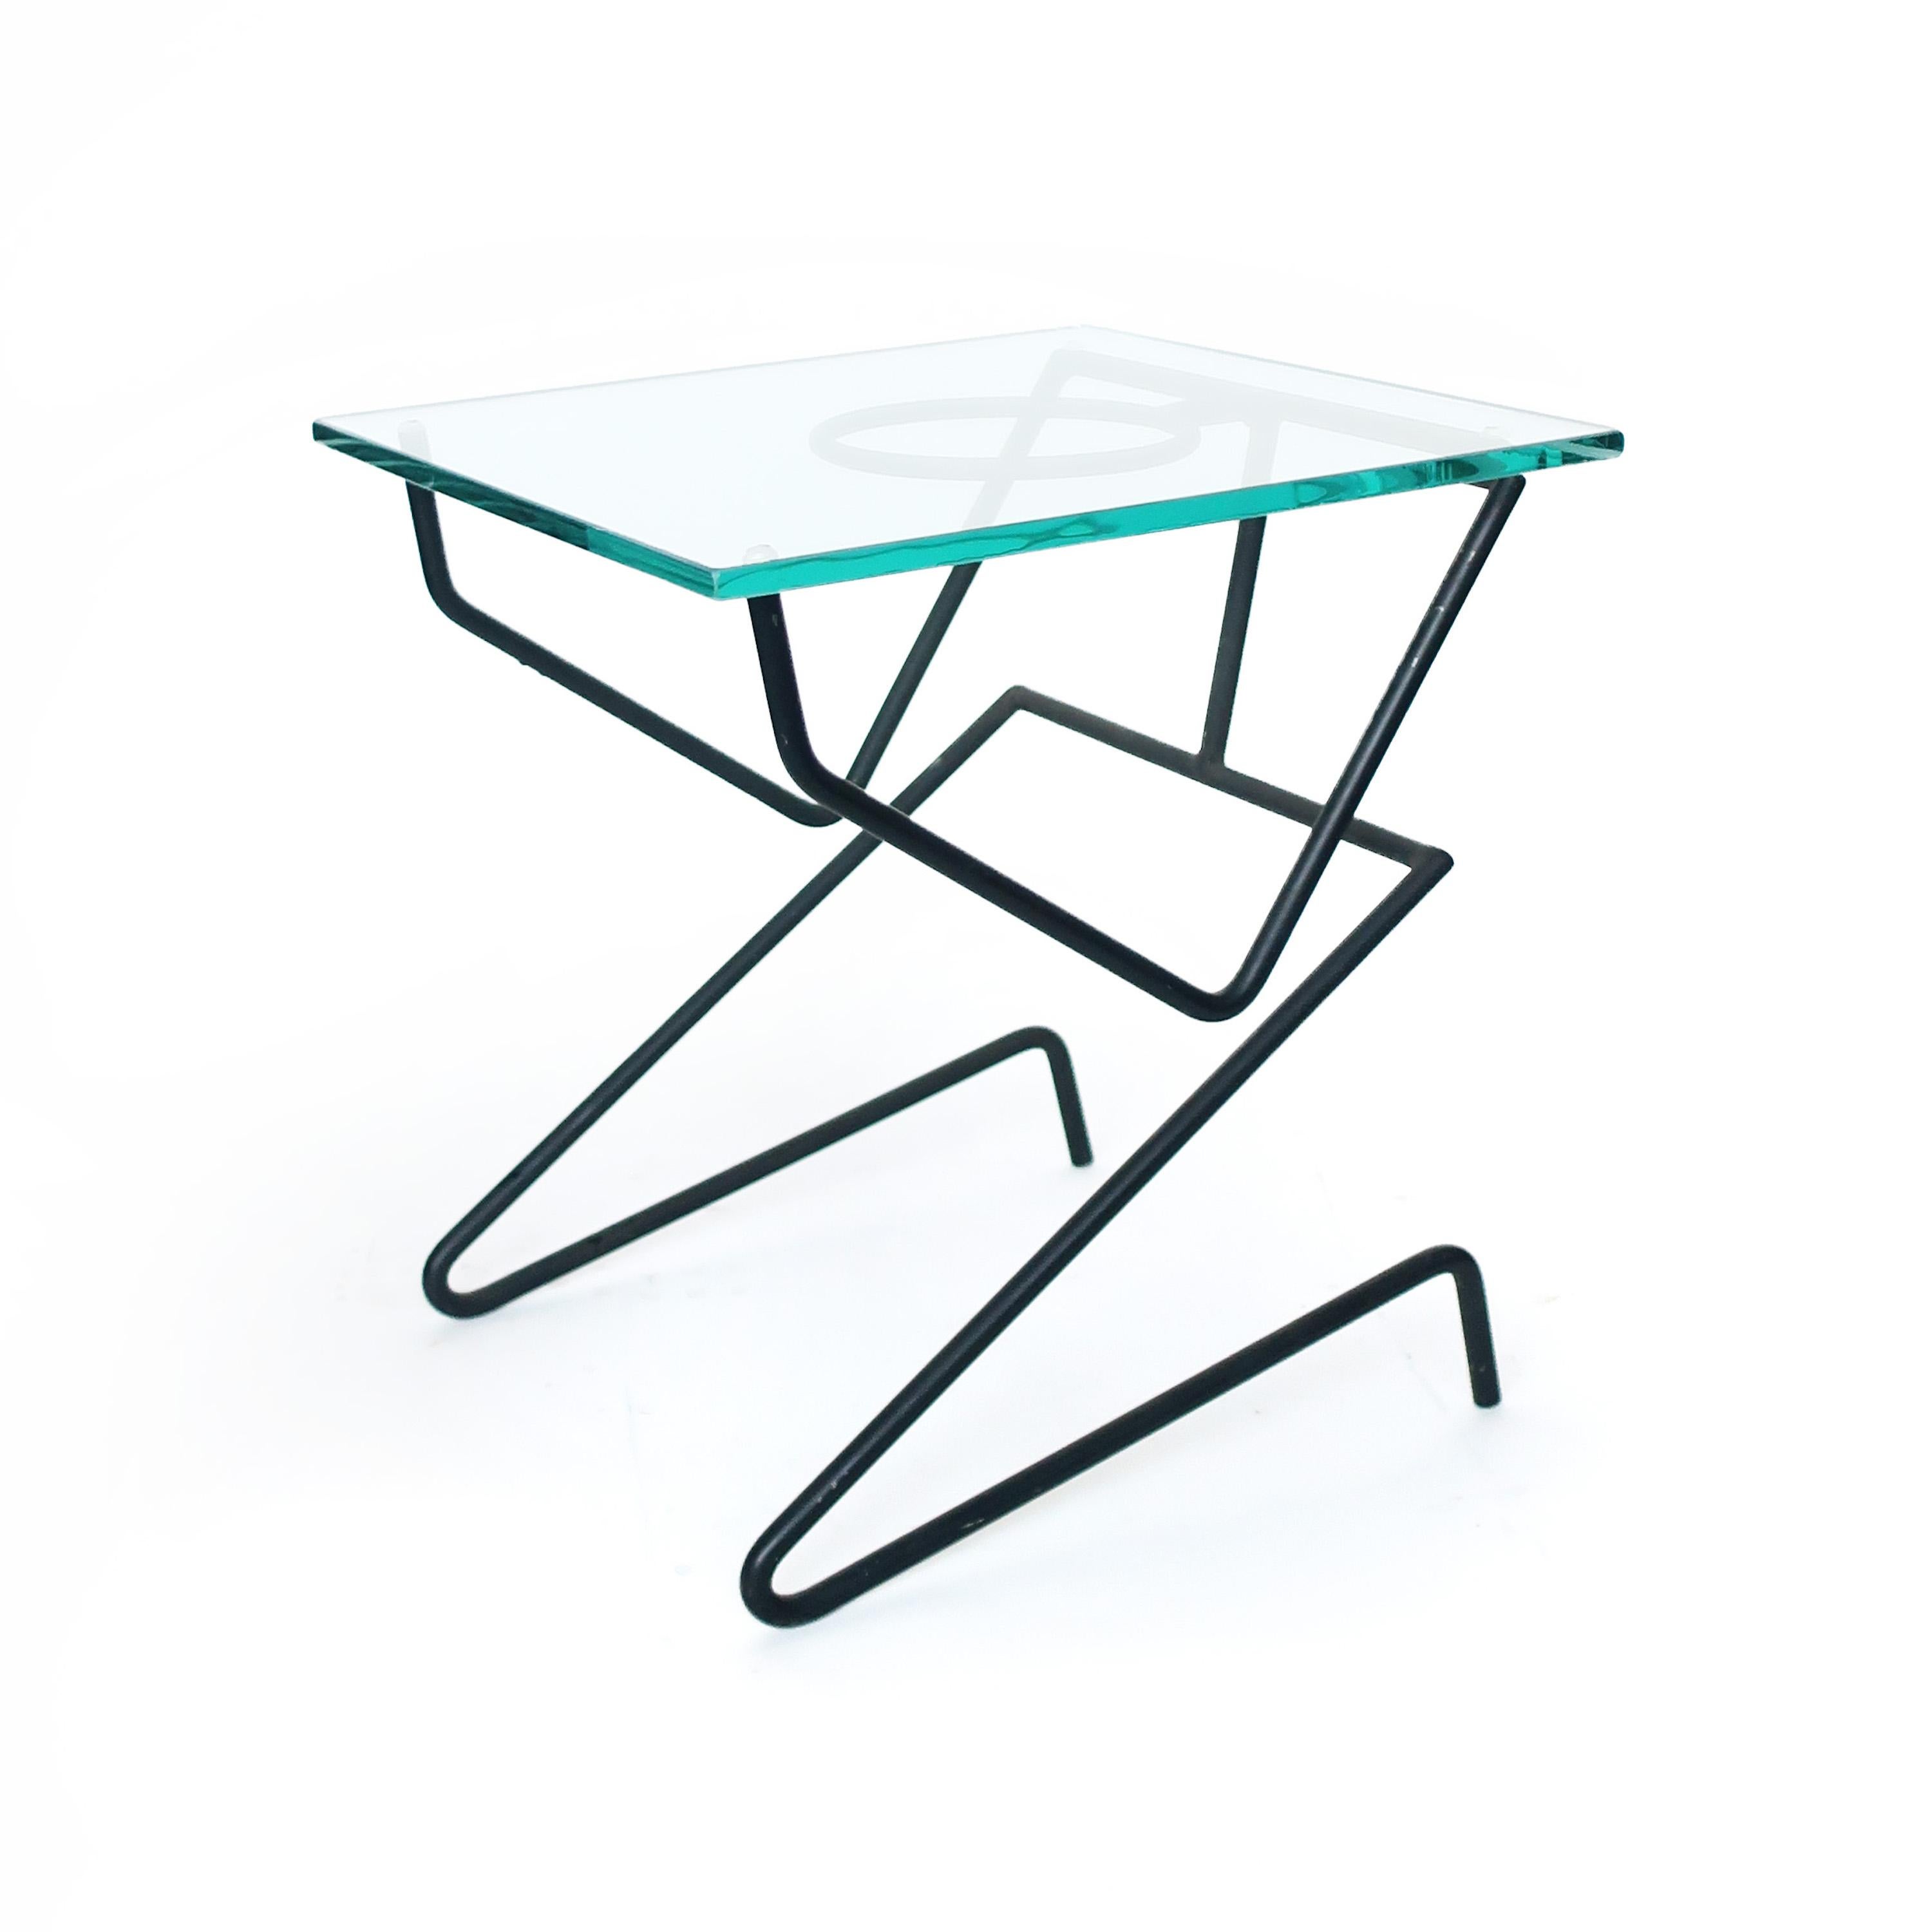 An unusual vintage figural side table by an unknown designer. With an iron base and thick glass top, this 